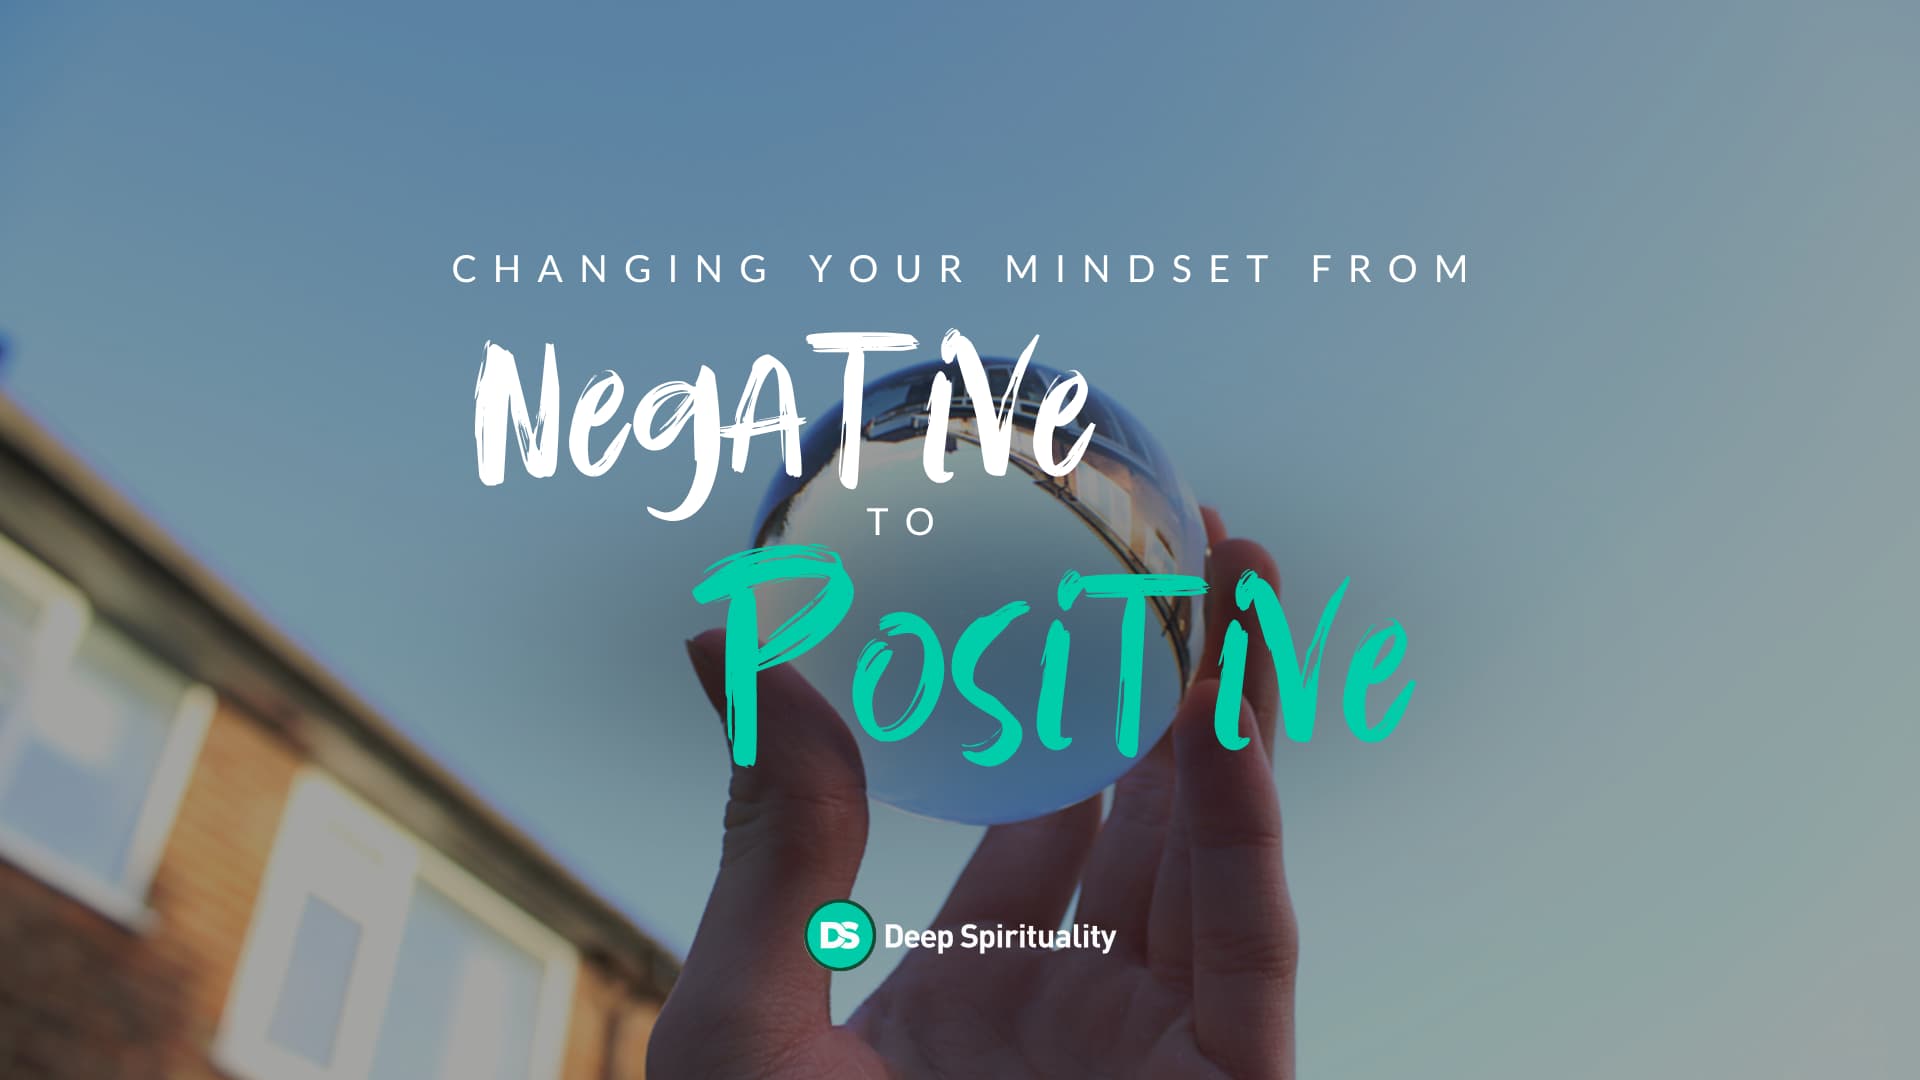 Changing Your Mindset From Negative to Positive  29